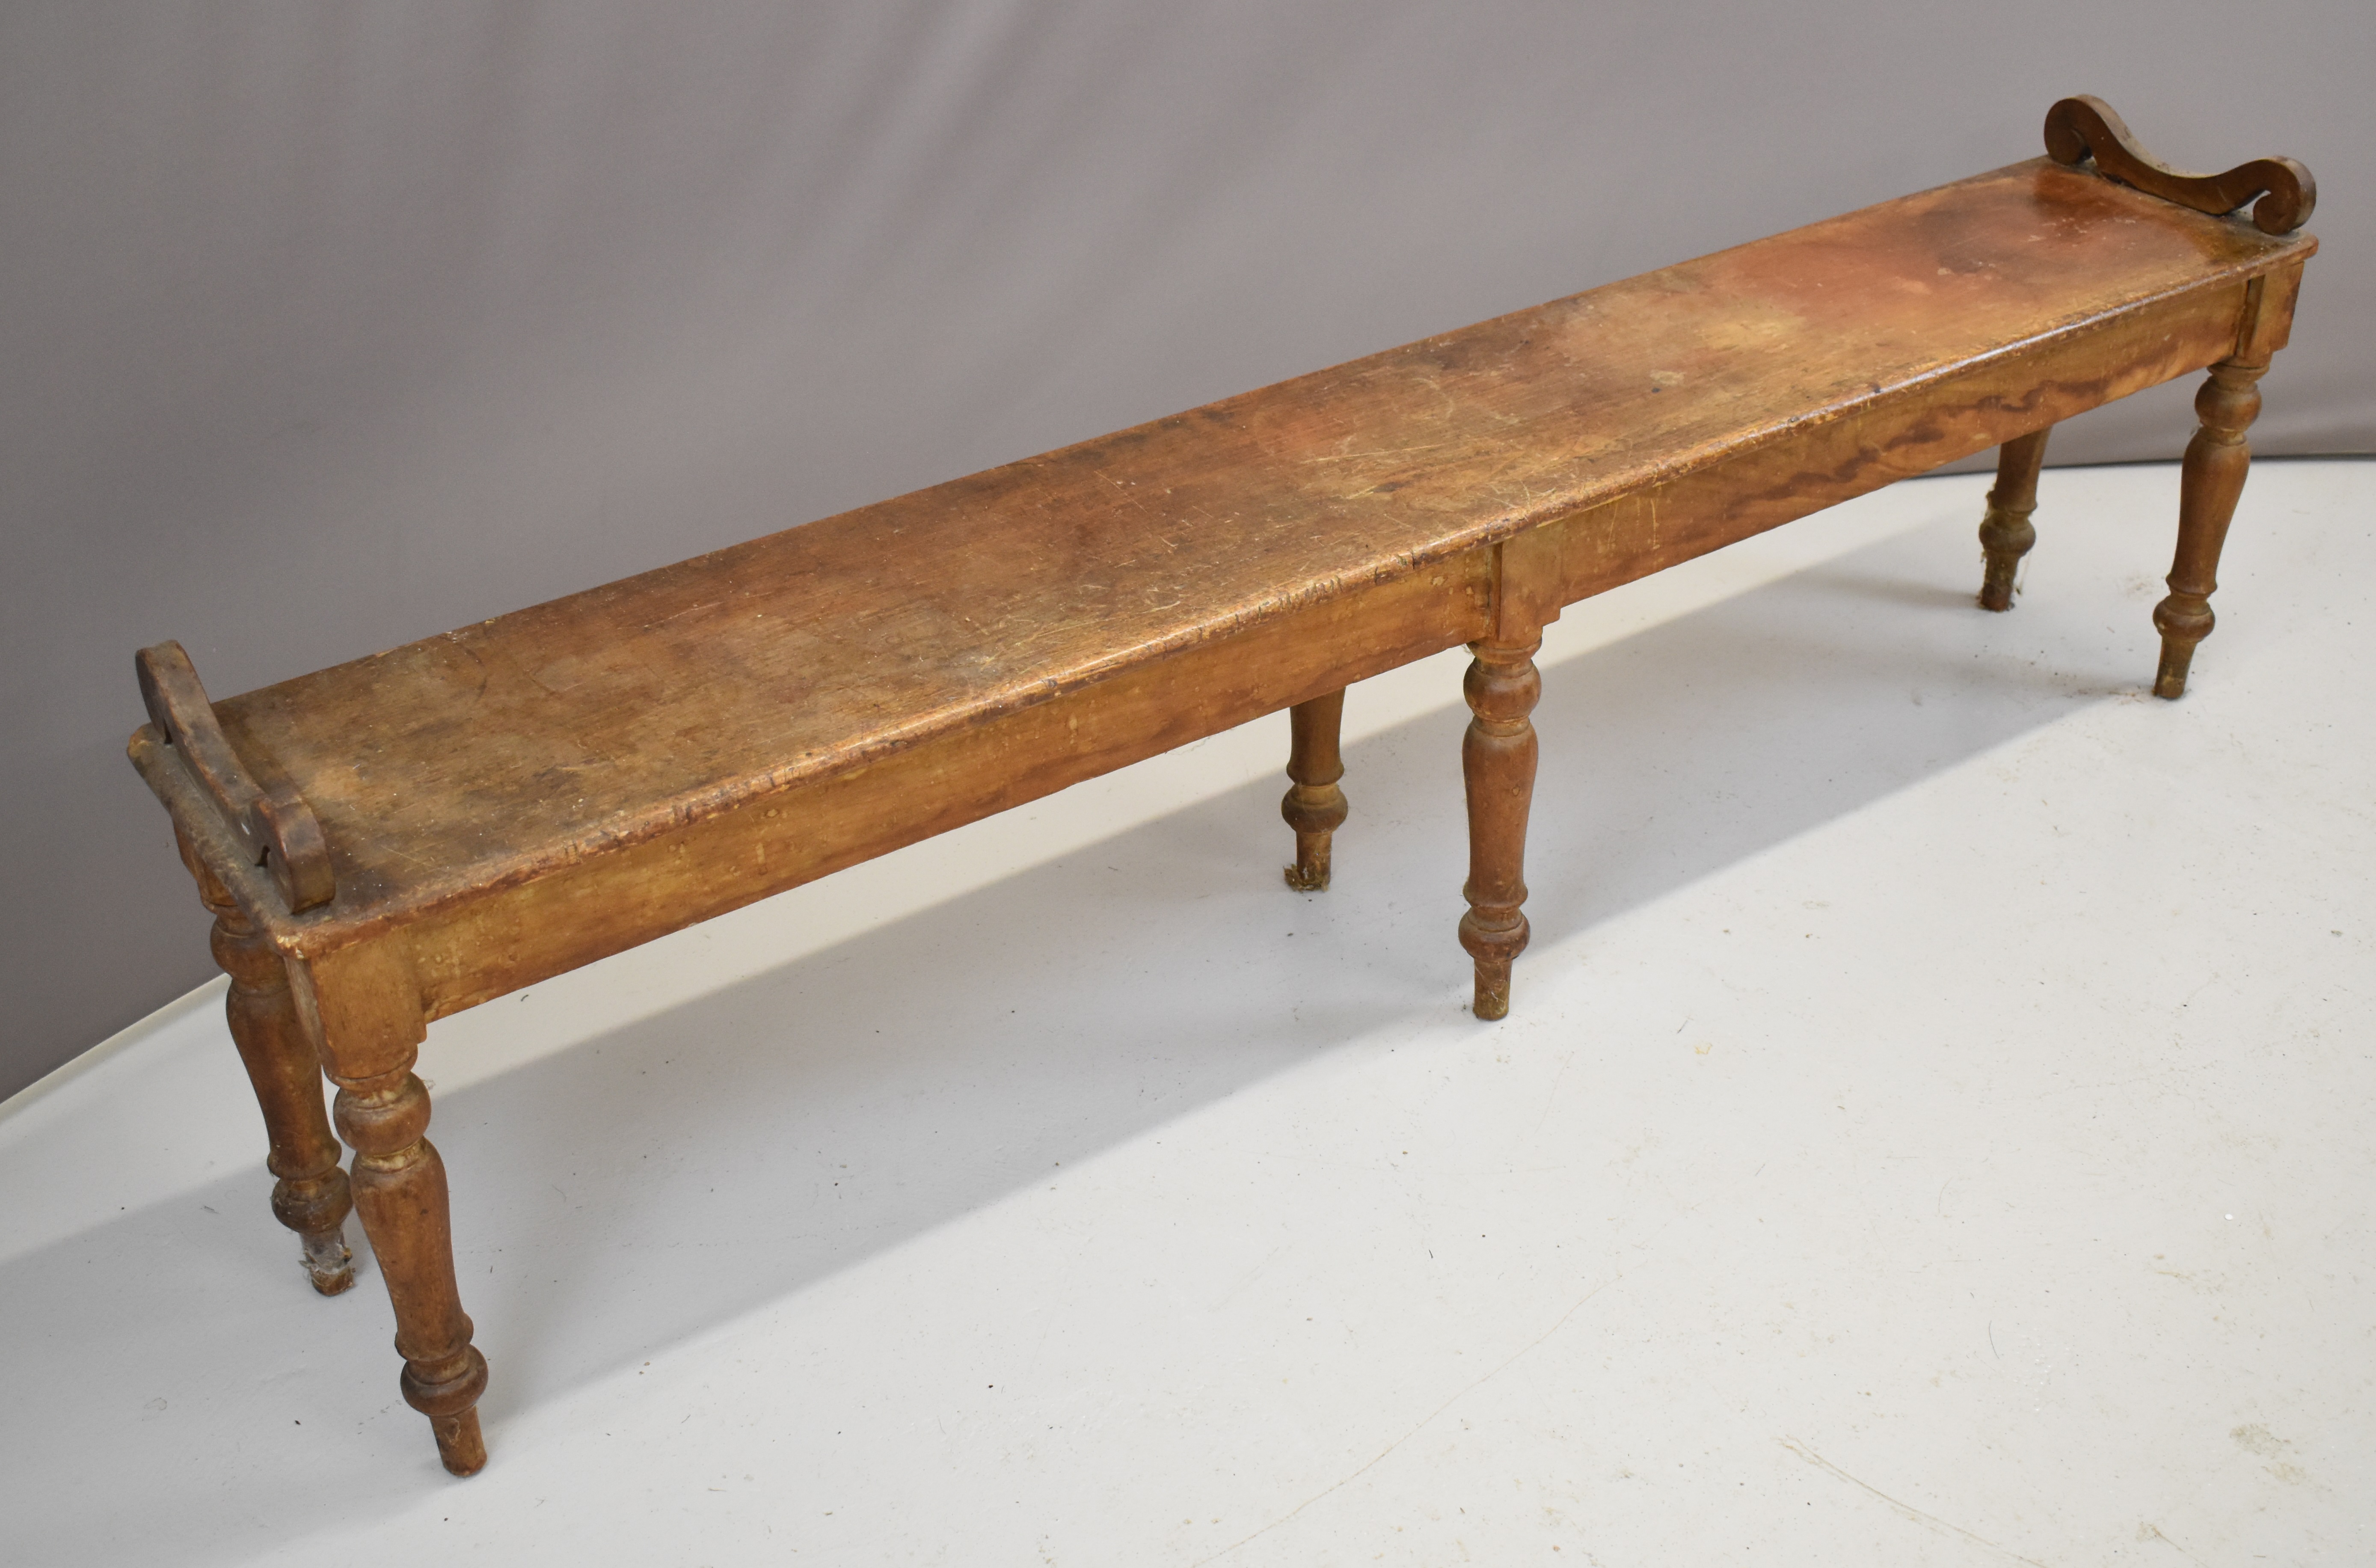 19thC ash window seat or low bench with scroll ends, raised on six turned legs, W193 x D30 x H46cm - Bild 2 aus 4